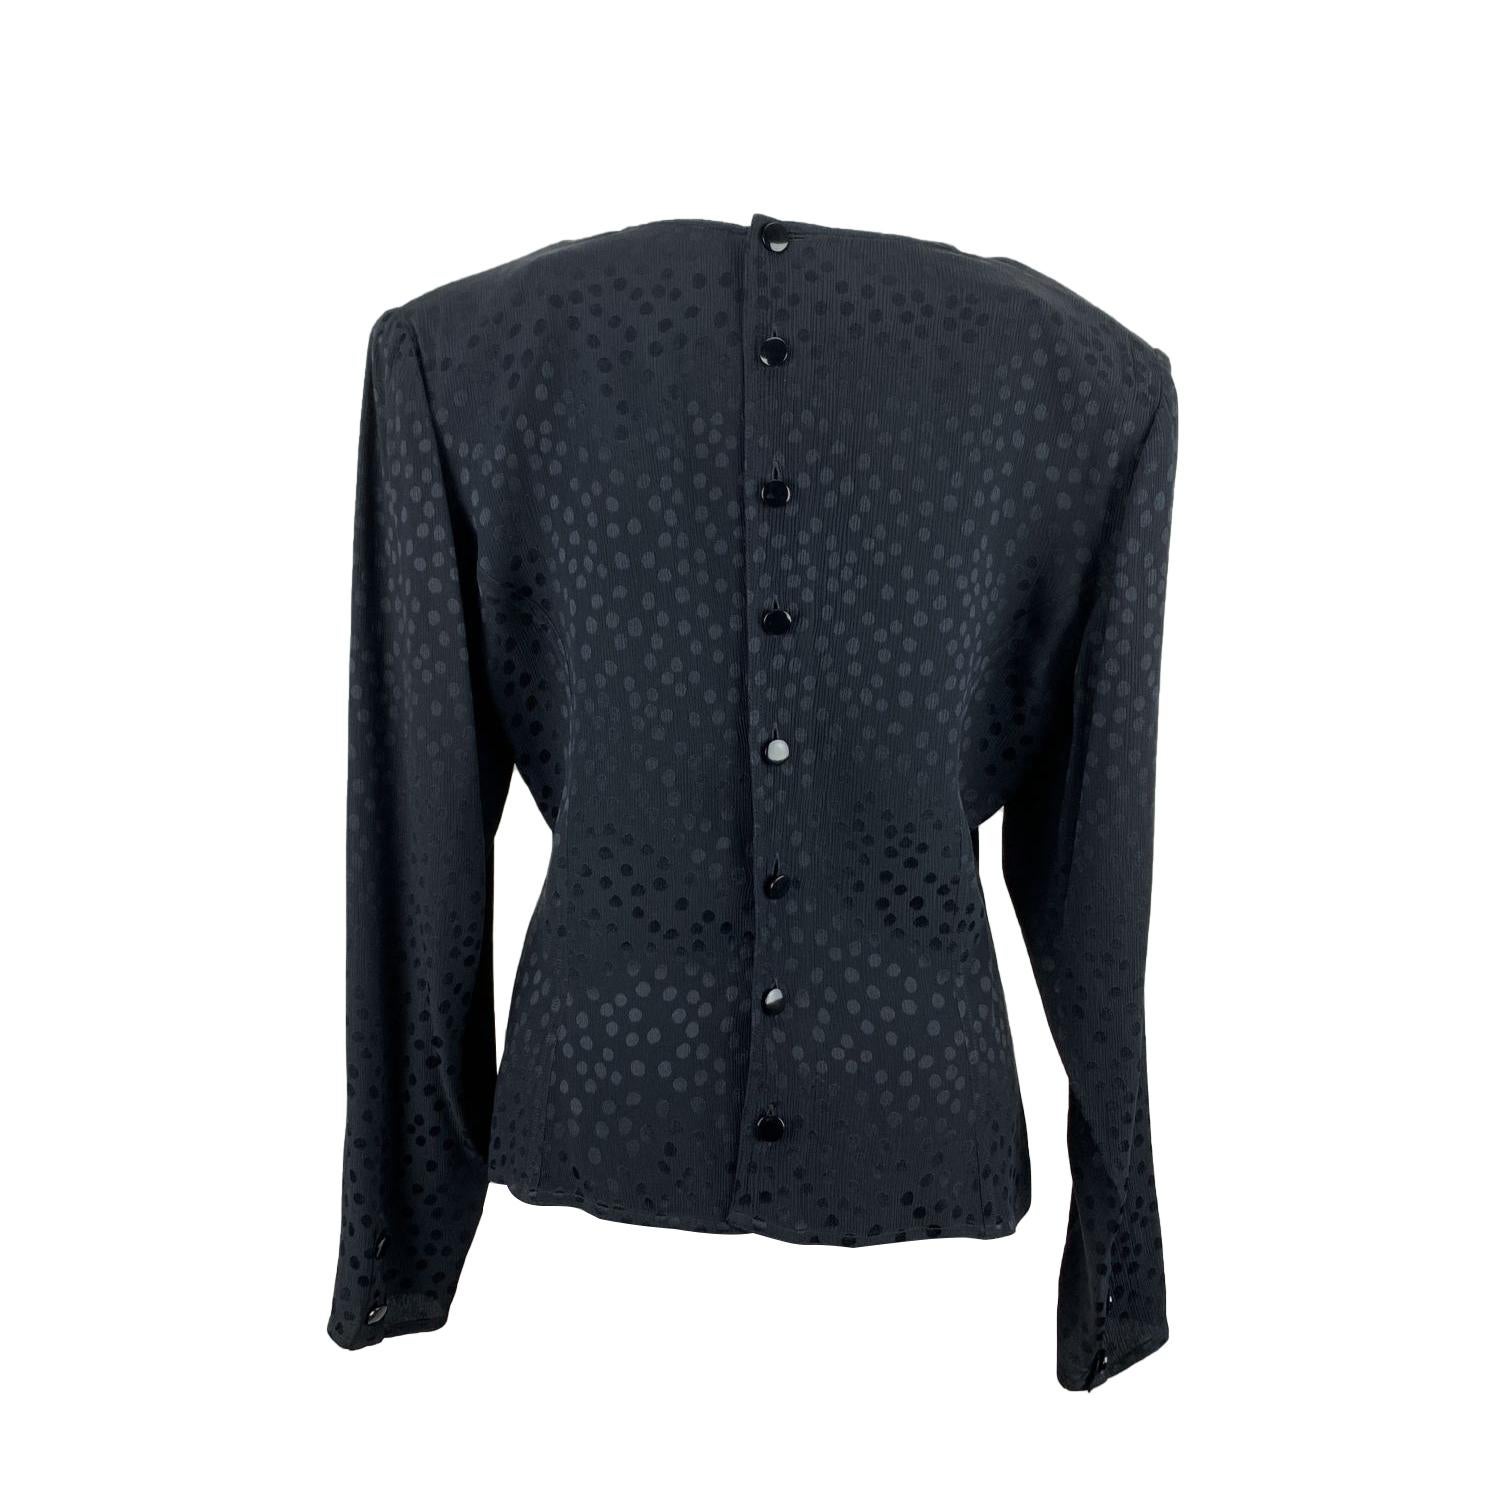 Valentino Miss V black wrap-style blouse. It features a v-neckline, long sleeve with shoulder pads and buttoned cuffs and button closure on the back. Composition tag is missing; it seems to be silk. Size: 46 IT, 12 (it should correspond to a MEDIUM